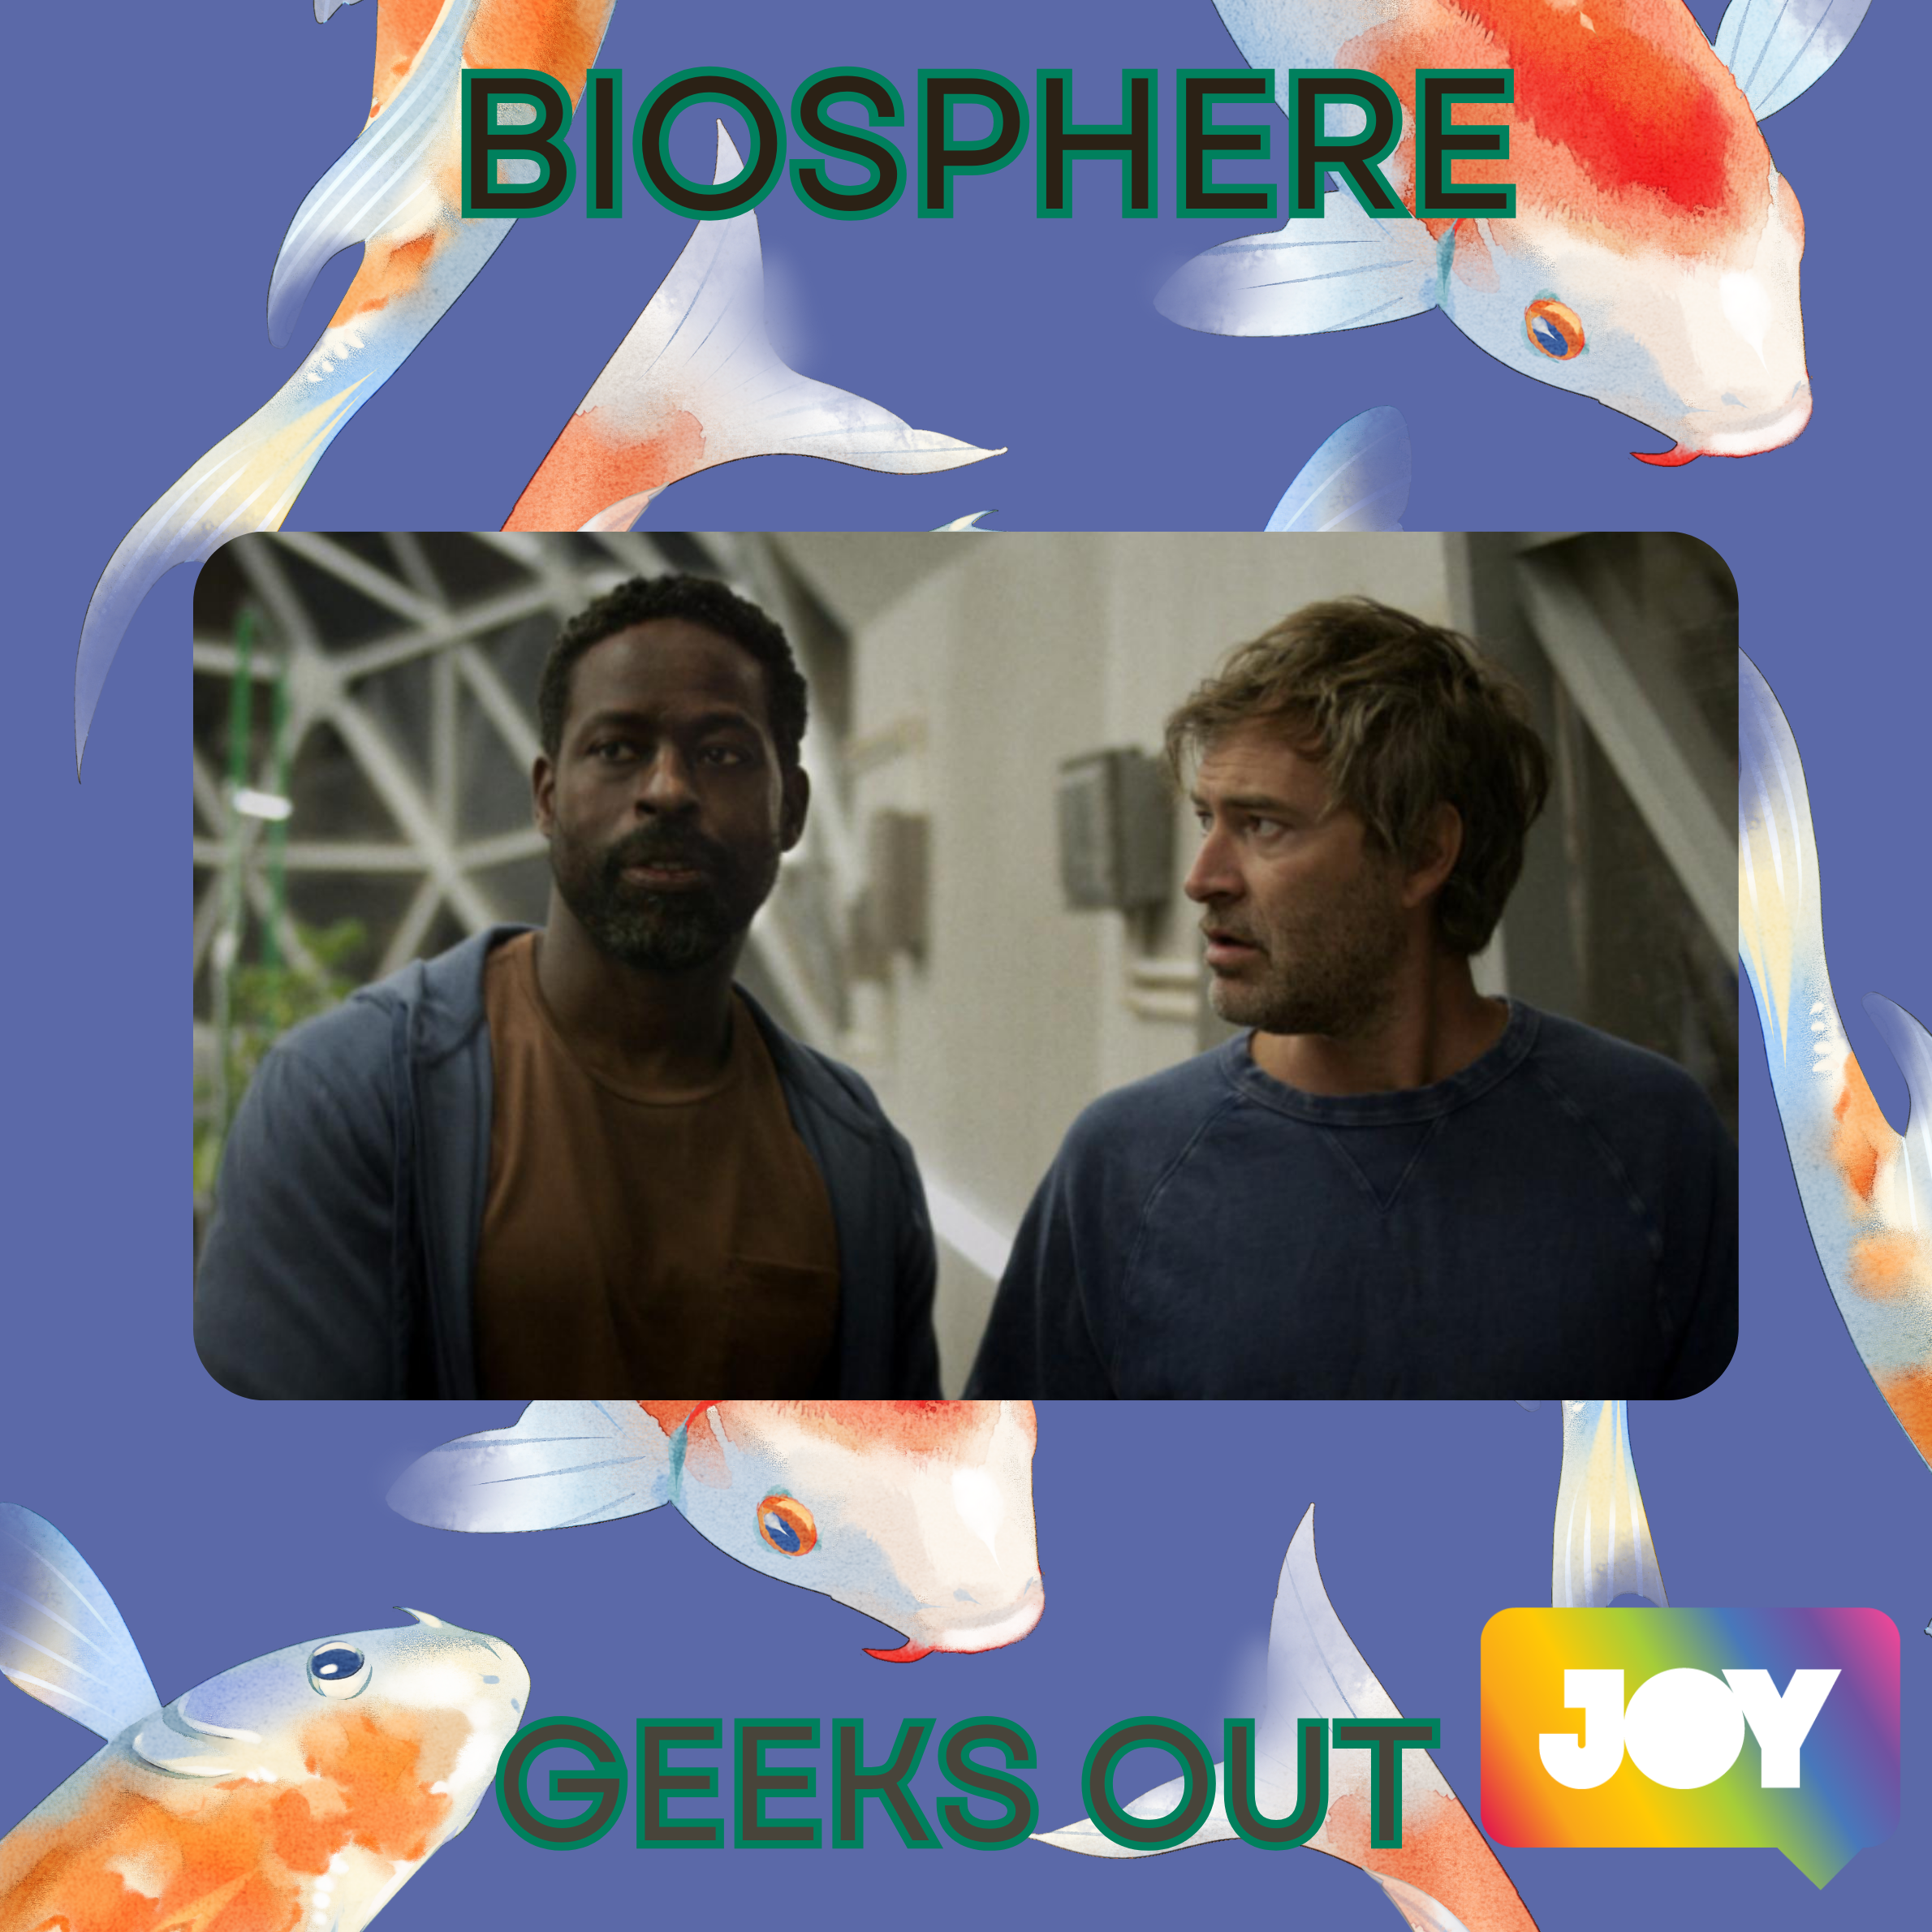 Two Men and a Bubble: A Biosphere Review